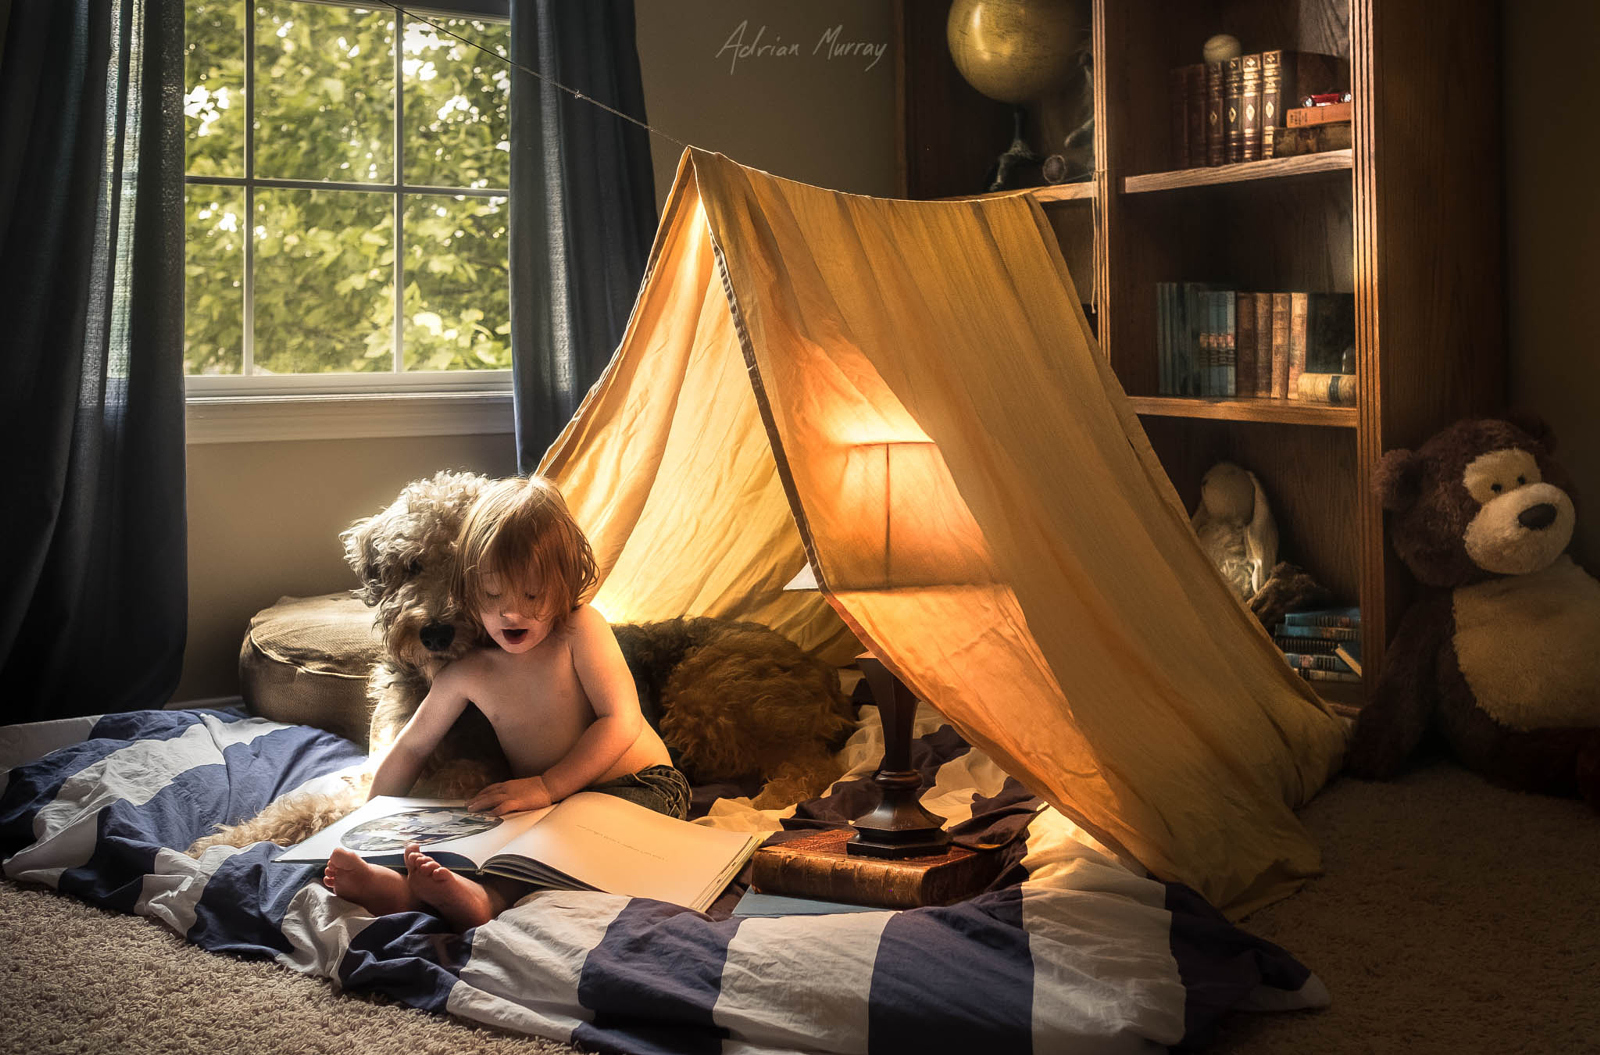 Interview: First Look At Family Photographer Adrian Murray's Upcoming Book